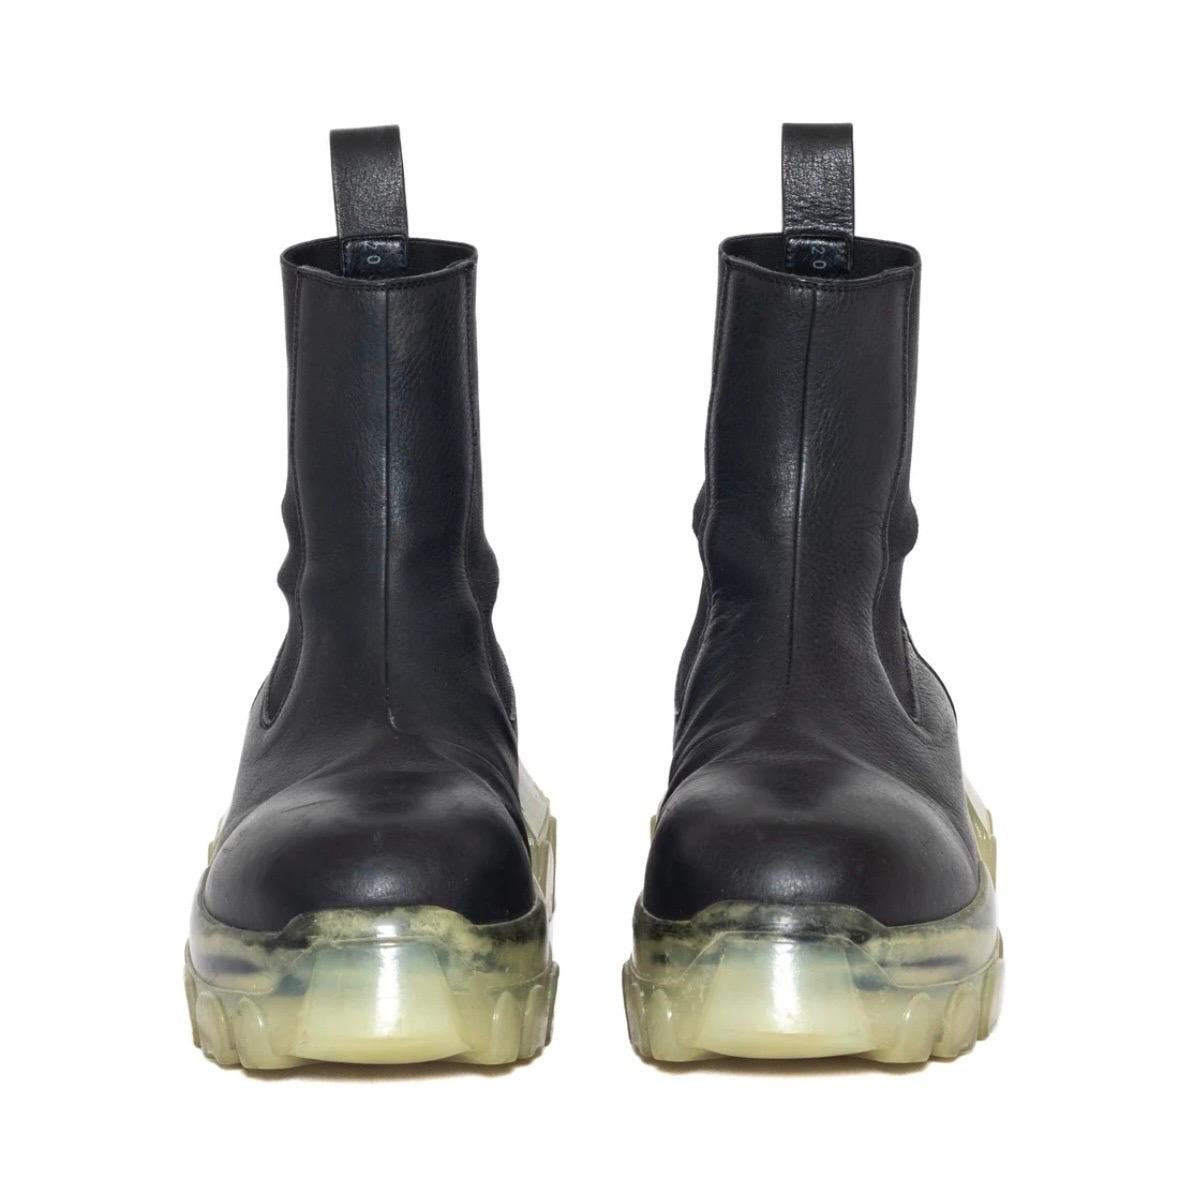 Rick Owens Black and Transparent Beatle Bozo Tractor Boots Size 38

Beatle Bozo Tractor Boots
Spring 2021 Phlegethon Collection
Black leather calfskin upper
Transparent rubber sole
Signature chunky outsole
Back pull strap
Elasticized side